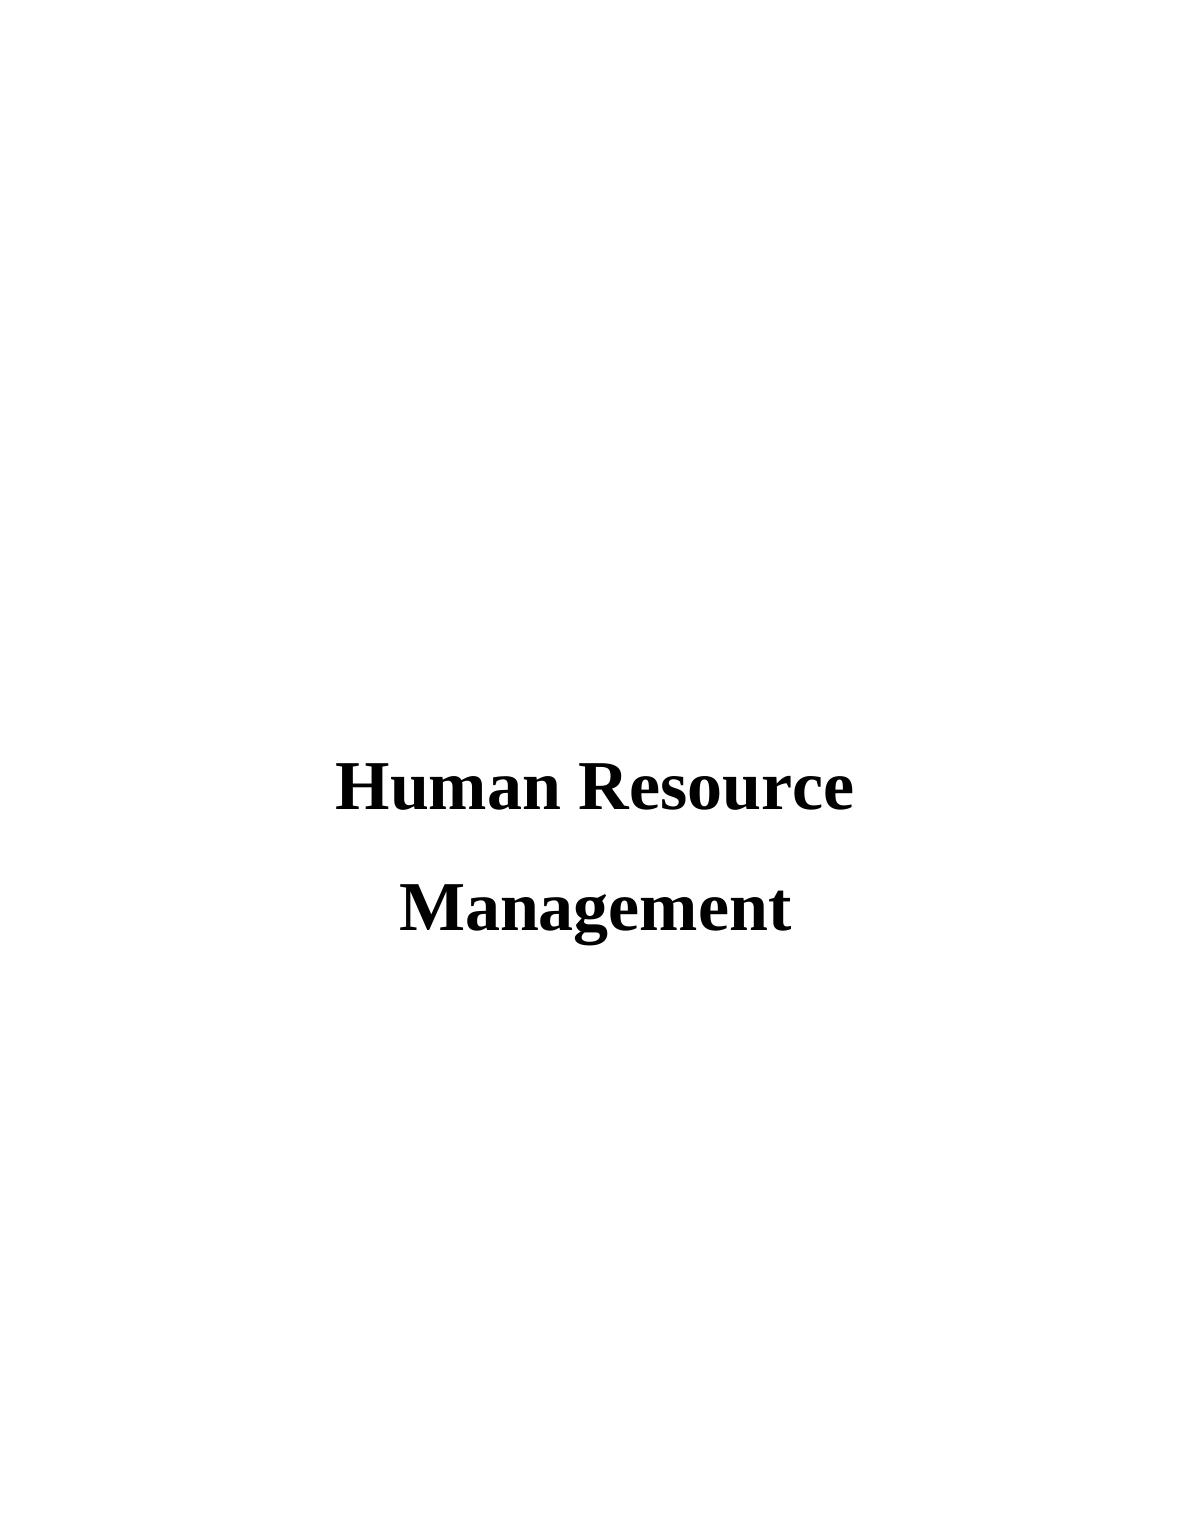 Personnel and Human Resource Management | Assignment_1